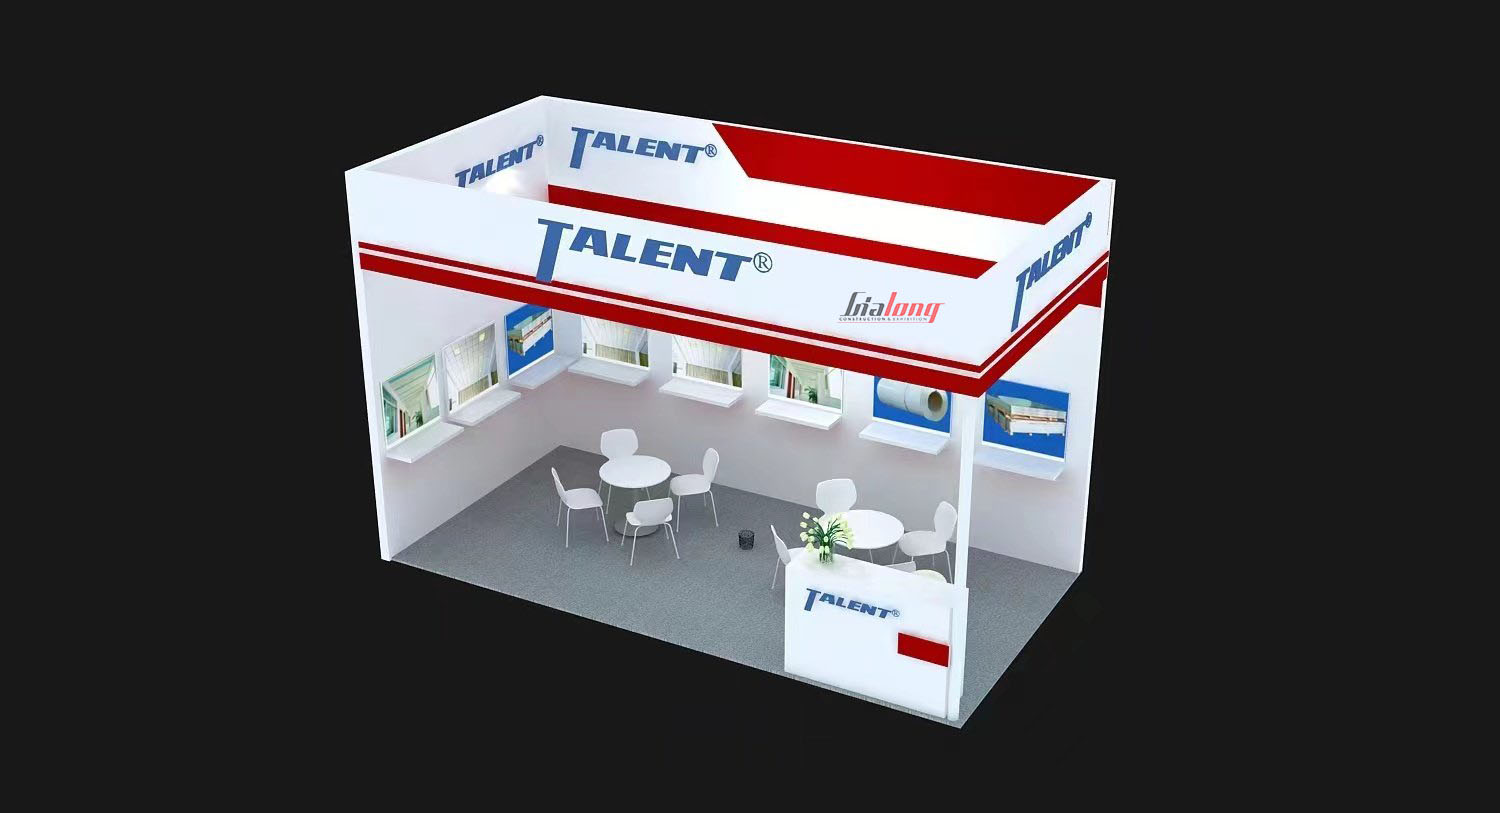 The Talent exhibition stand was designed and constructed by Gia Long